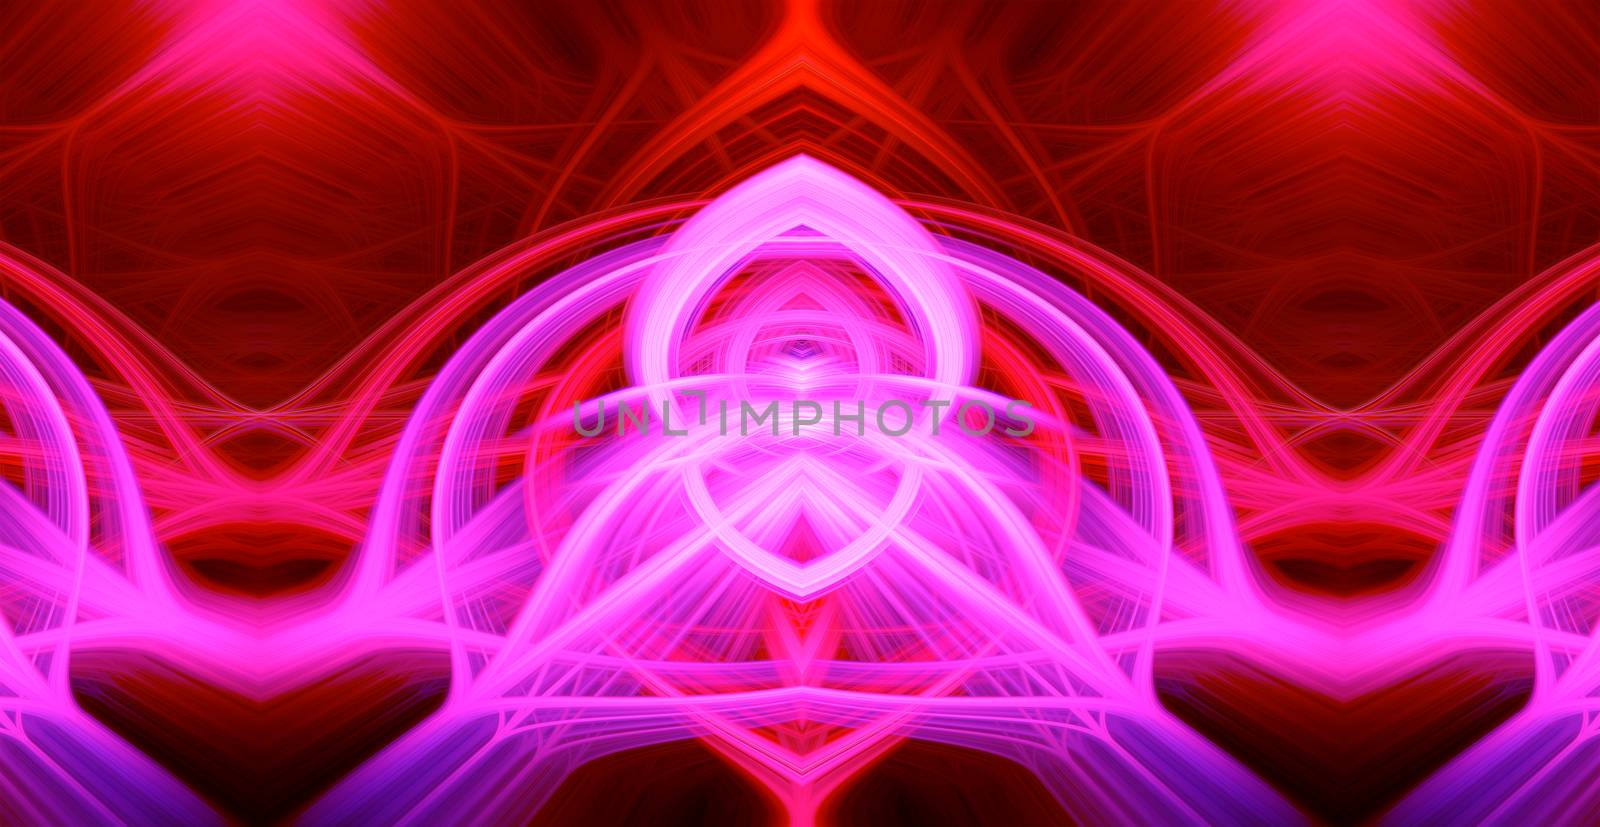 Beautiful abstract intertwined glowing 3d fibers forming a shape of pointy domes, sparkle, flame, flower, interlinked hearts. Purple, maroon, pink, and red colors. Illustration.